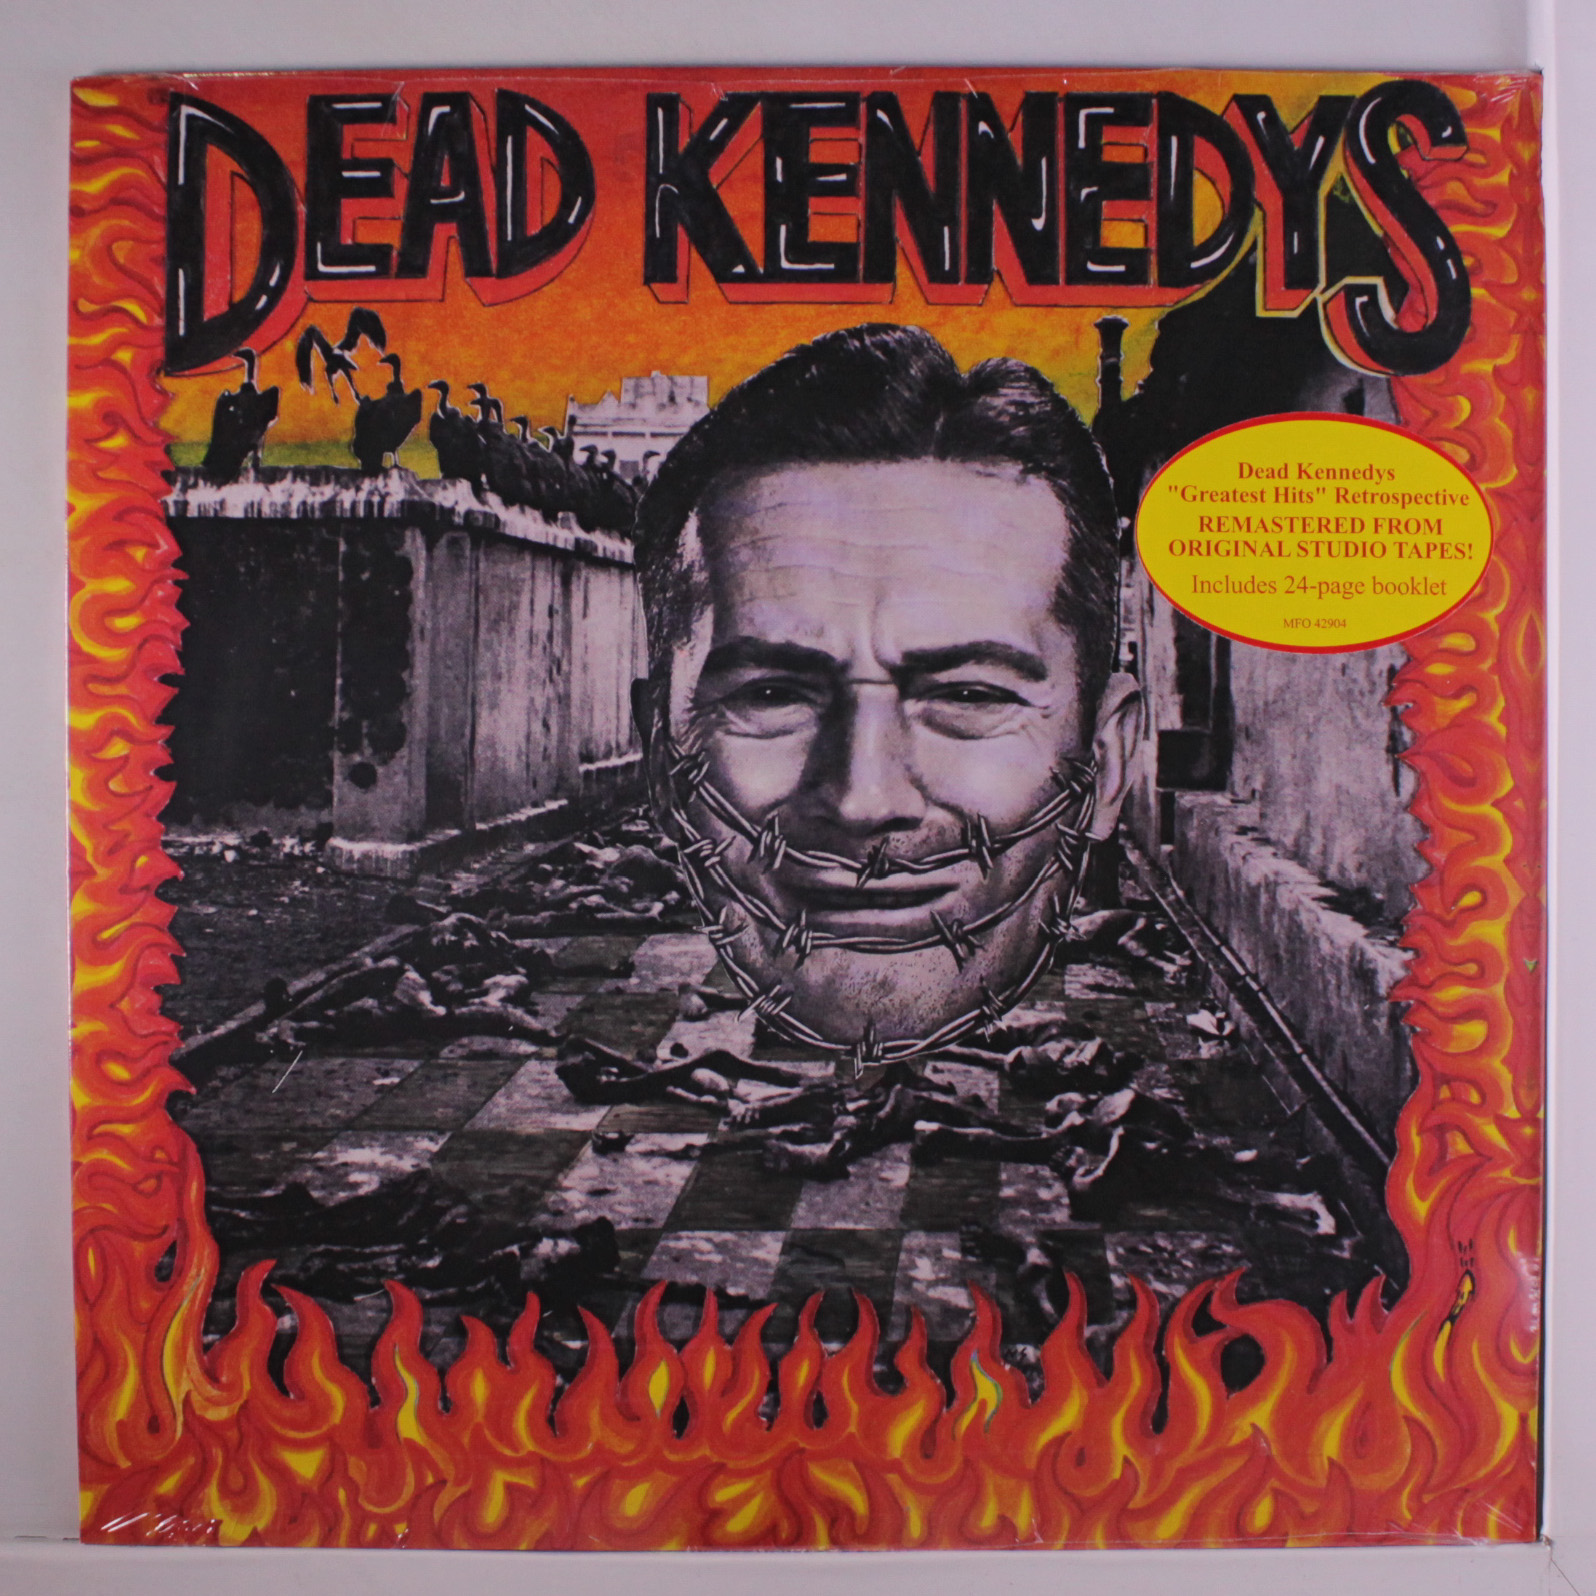  DEAD KENNEDY'S - GIVE ME CONVENIENCE OR GIVE ME DEATH $20 remastered from original tapes 24-page booklet @ 1987 Decay Music 